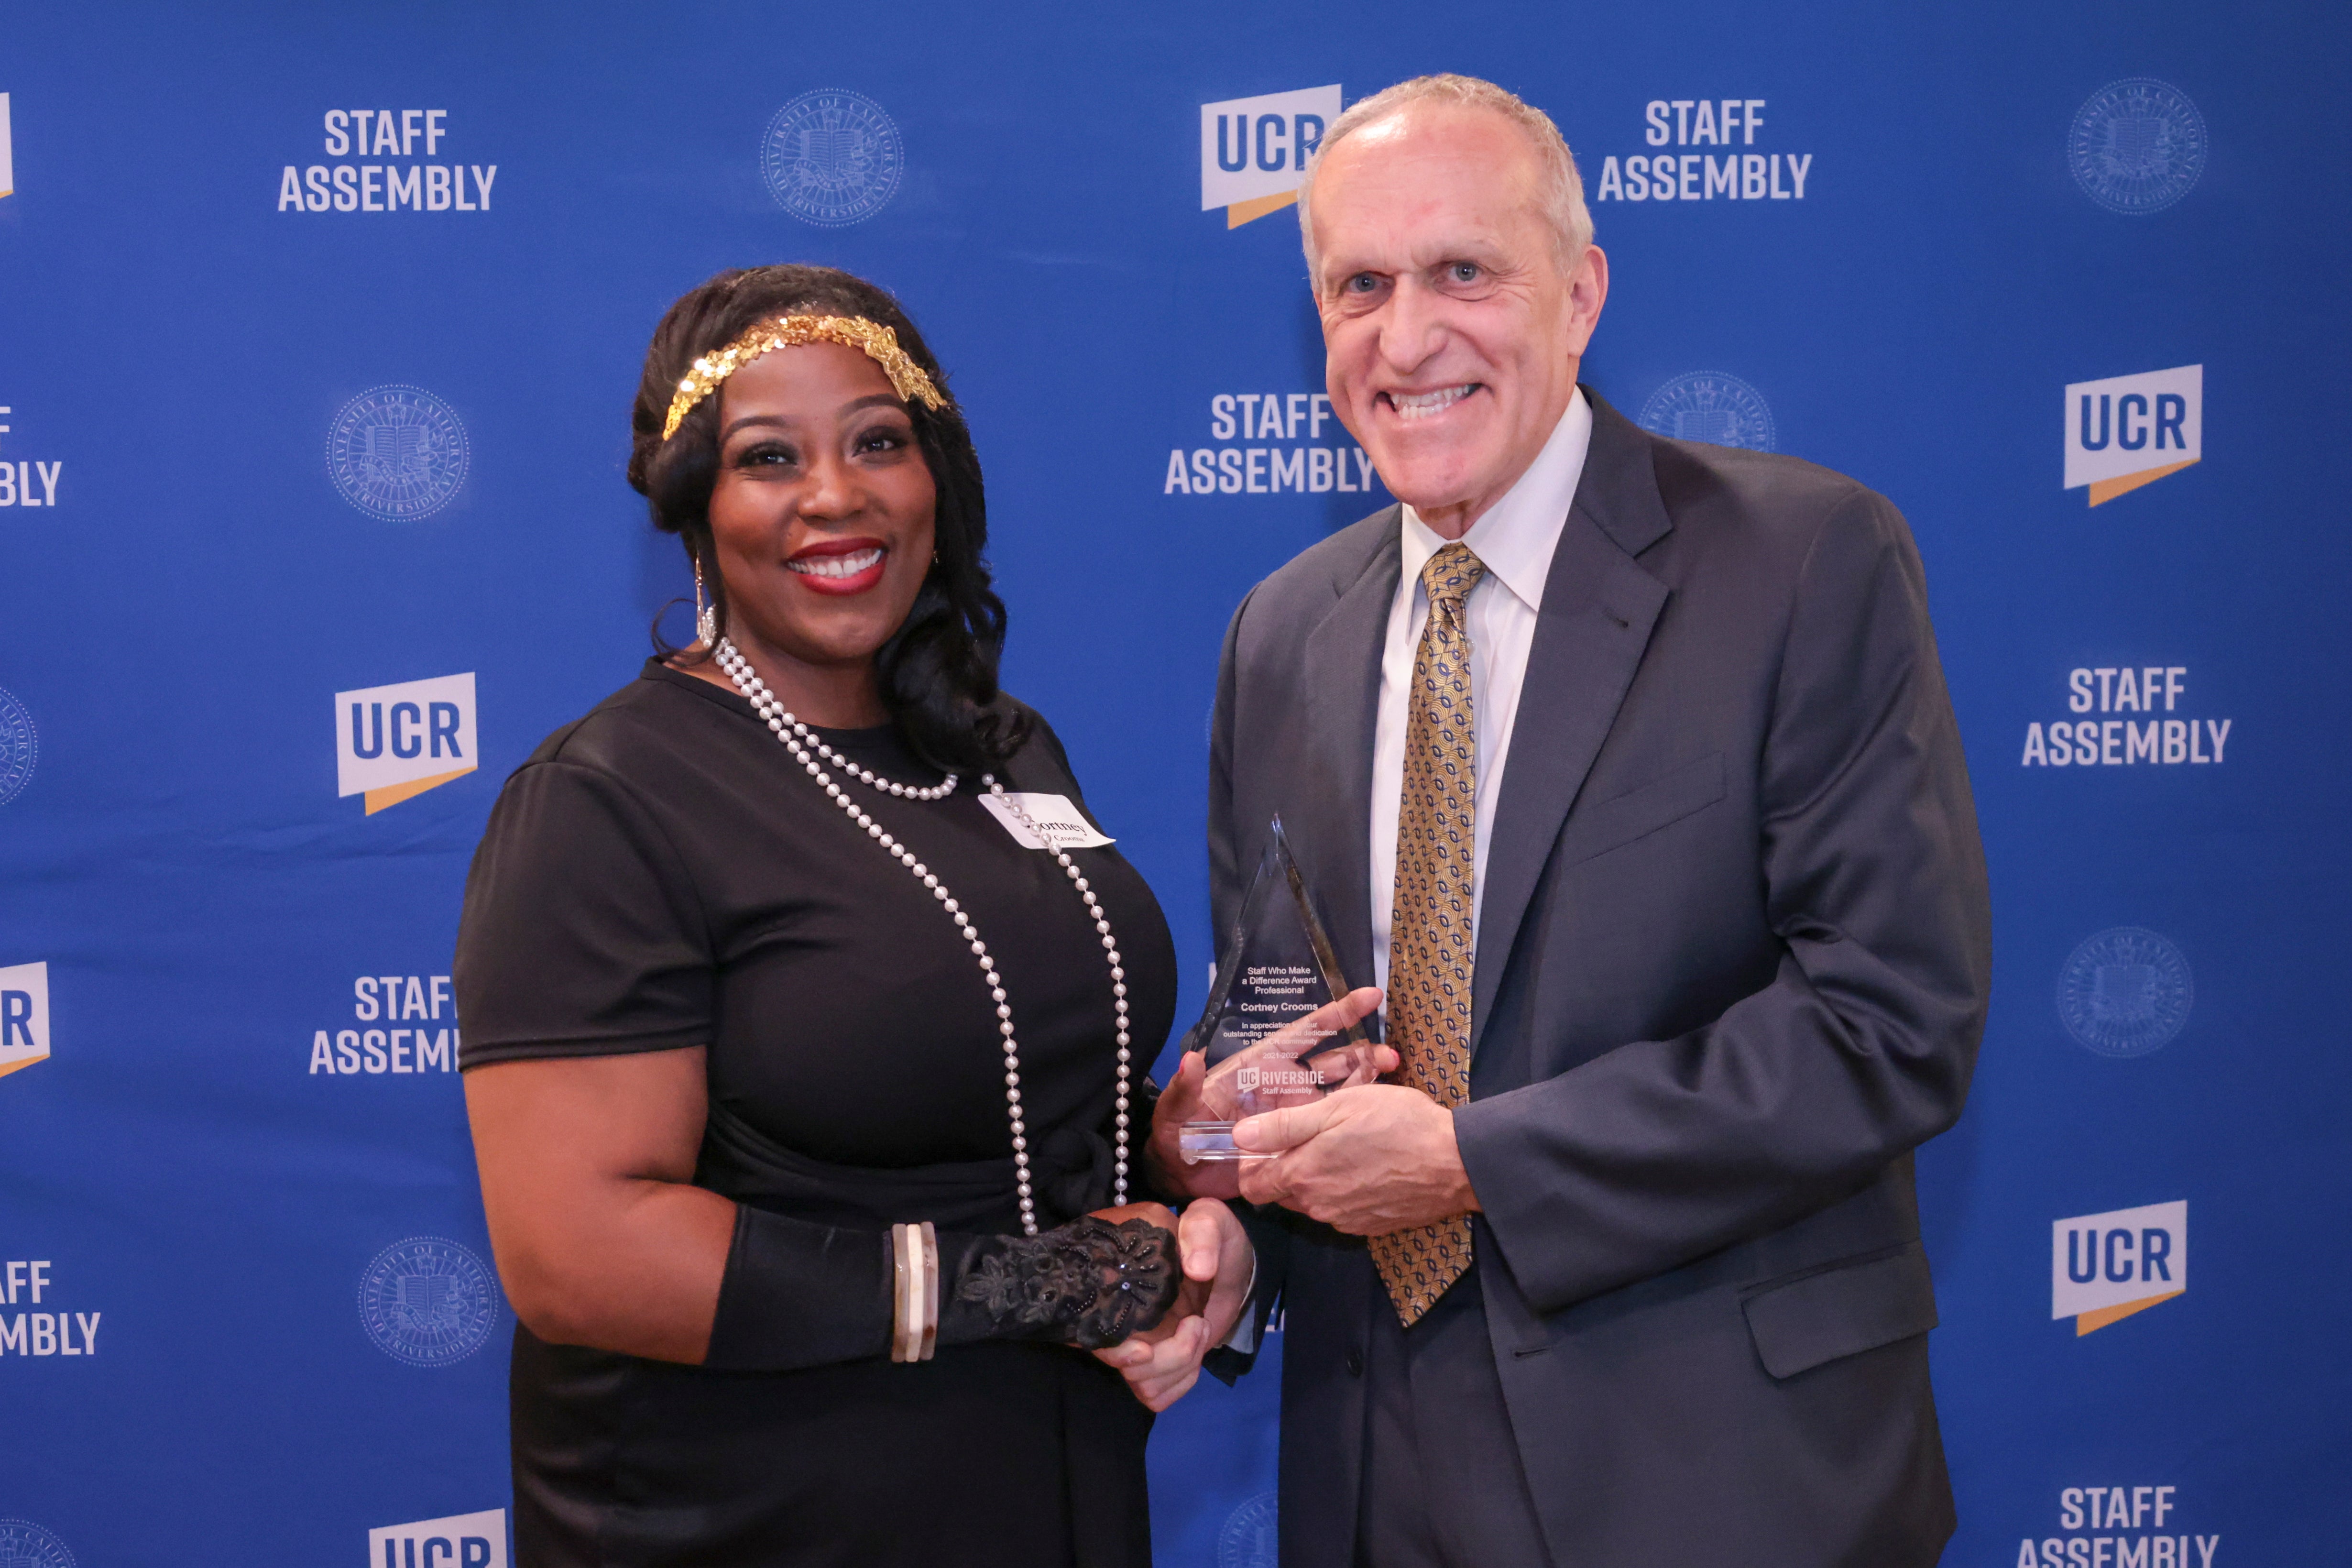 Staff Who Make a Difference award winner Cortney Crooms with Chancellor Wilcox at the 2022 Outstanding Staff Awards